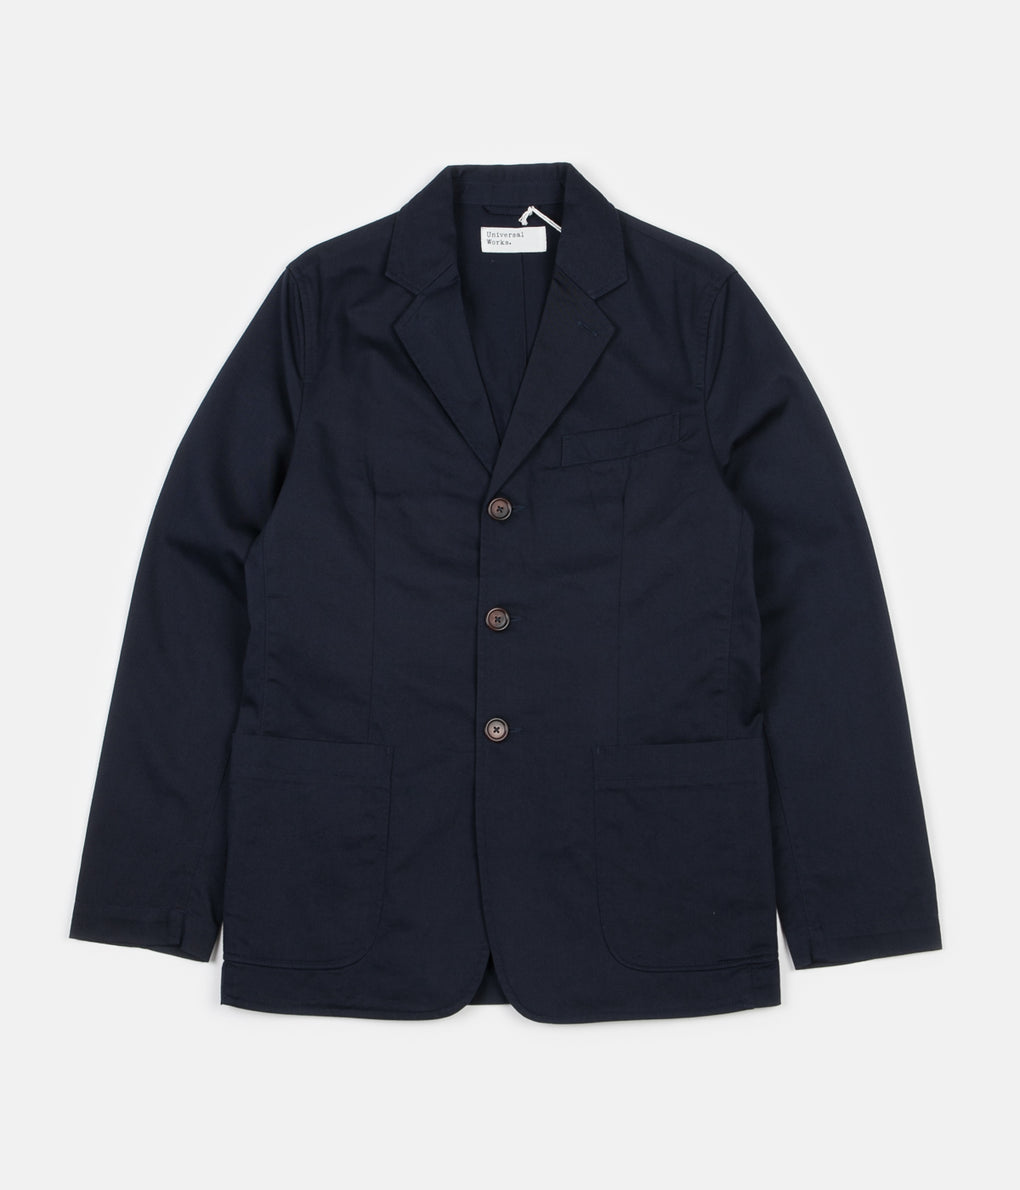 Universal Works London Jacket - Navy | Always in Colour